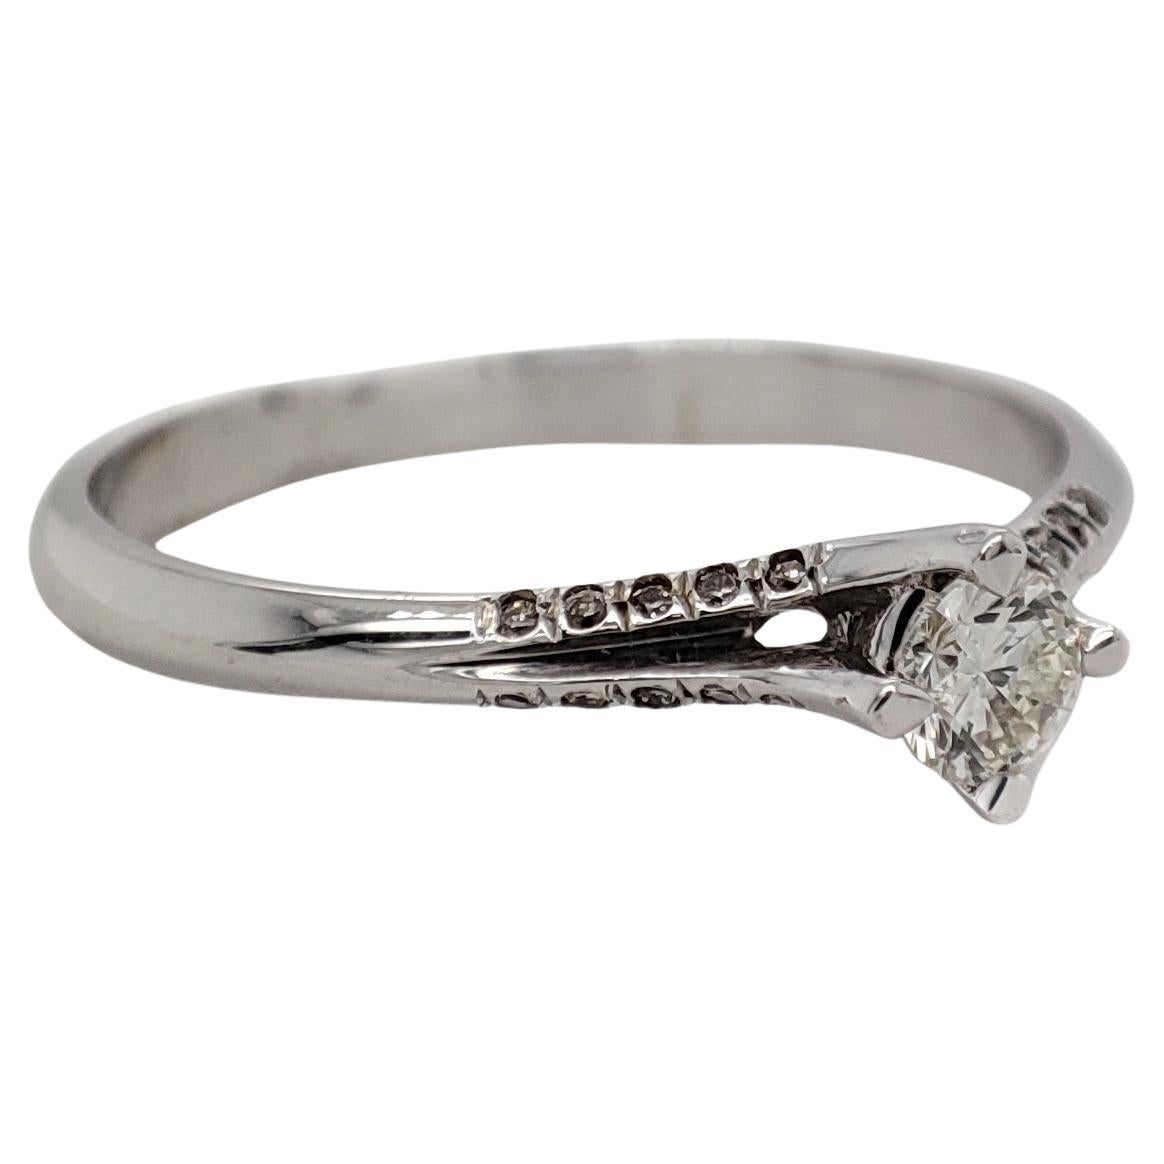 FOR US CUSTOMER NO VAT!

This elegant ring features a central 0.20-carat light yellow diamond with a clarity of SI2, adding a touch of warmth and subtle color to the design.

Crafted in 14K white gold, the ring is designed for a size 6.5 and has a